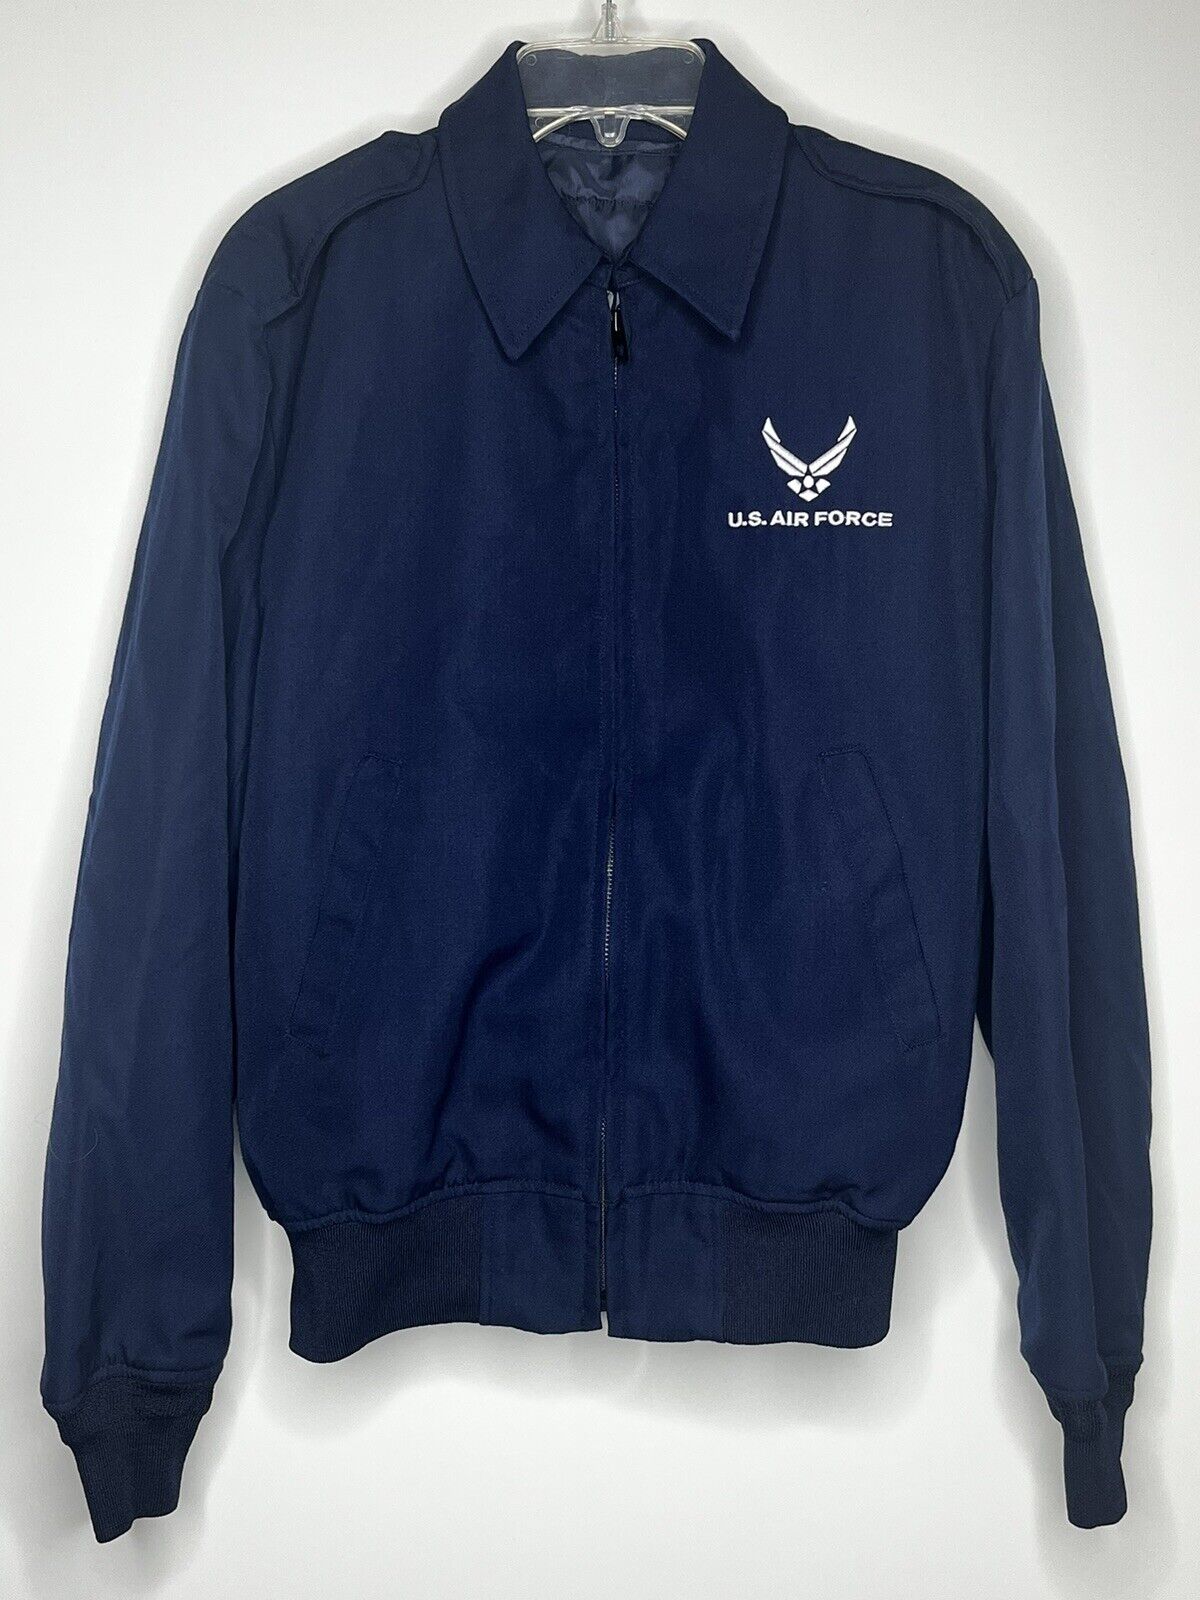 US Air Force Navy Blue Long Sleeve Men\'s Insulated Jacket Size 40R